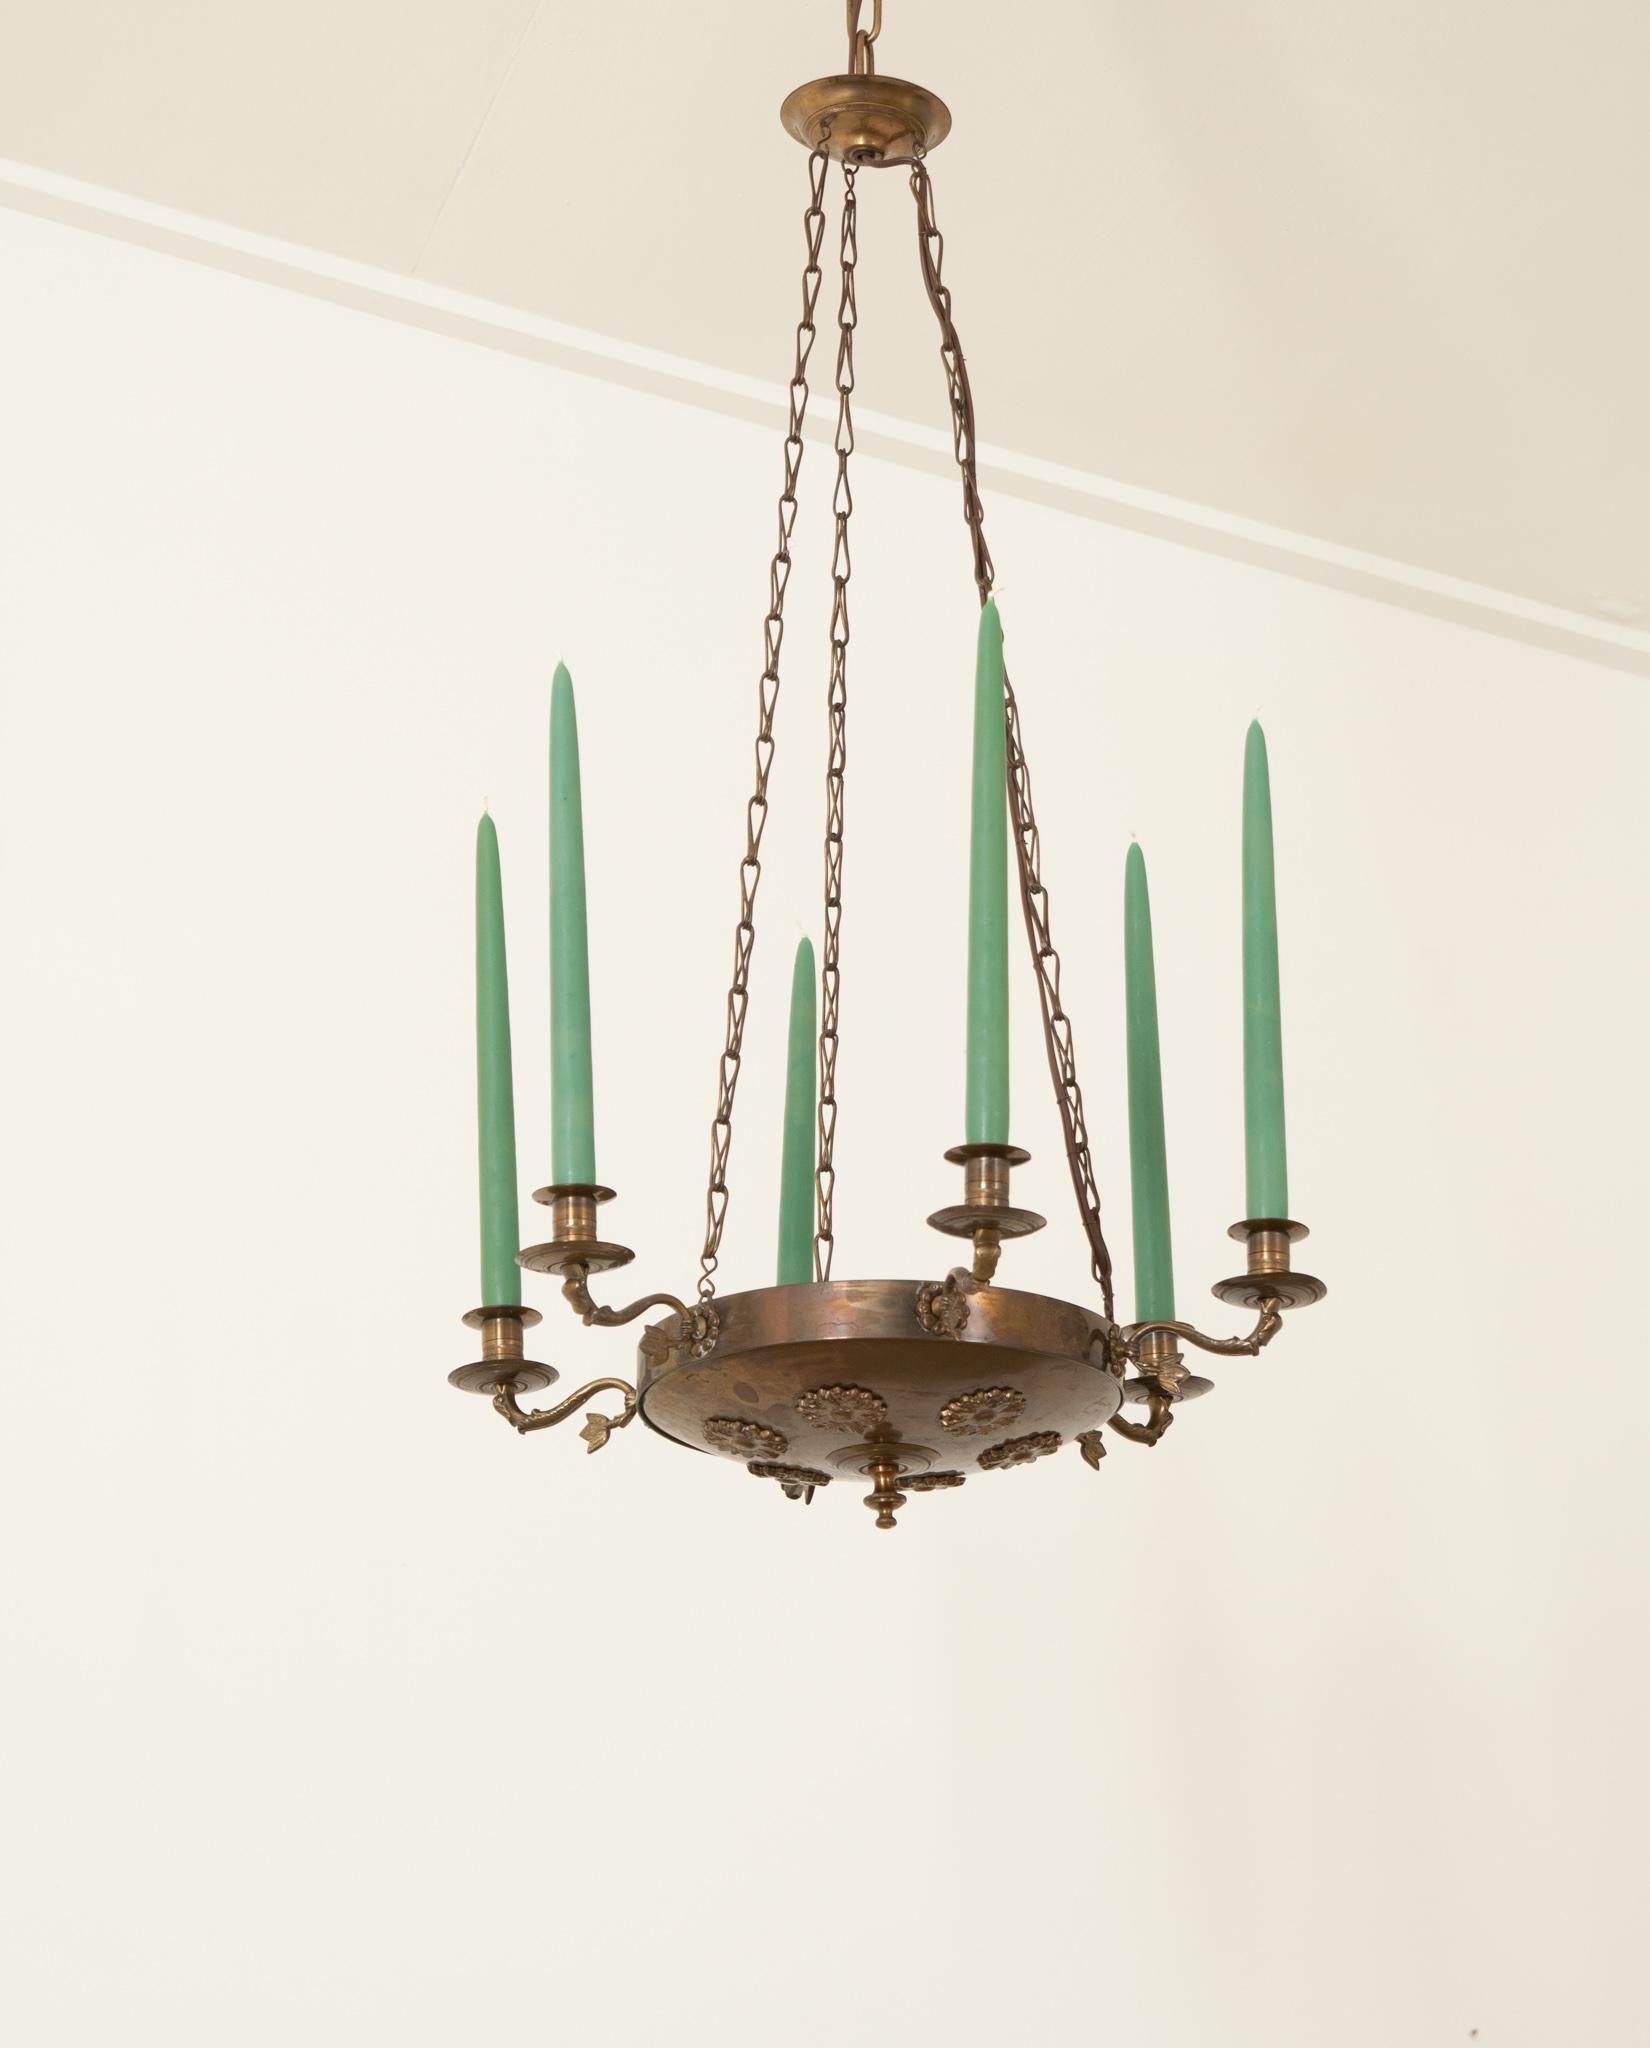 A lovely hand-crafted brass six arm chandelier made in 20th century France is just as pretty as it is functional. The wonderfully patinated brass bowl is decorated with rosettes and has an elegant finial in its center. Inside you will find it is